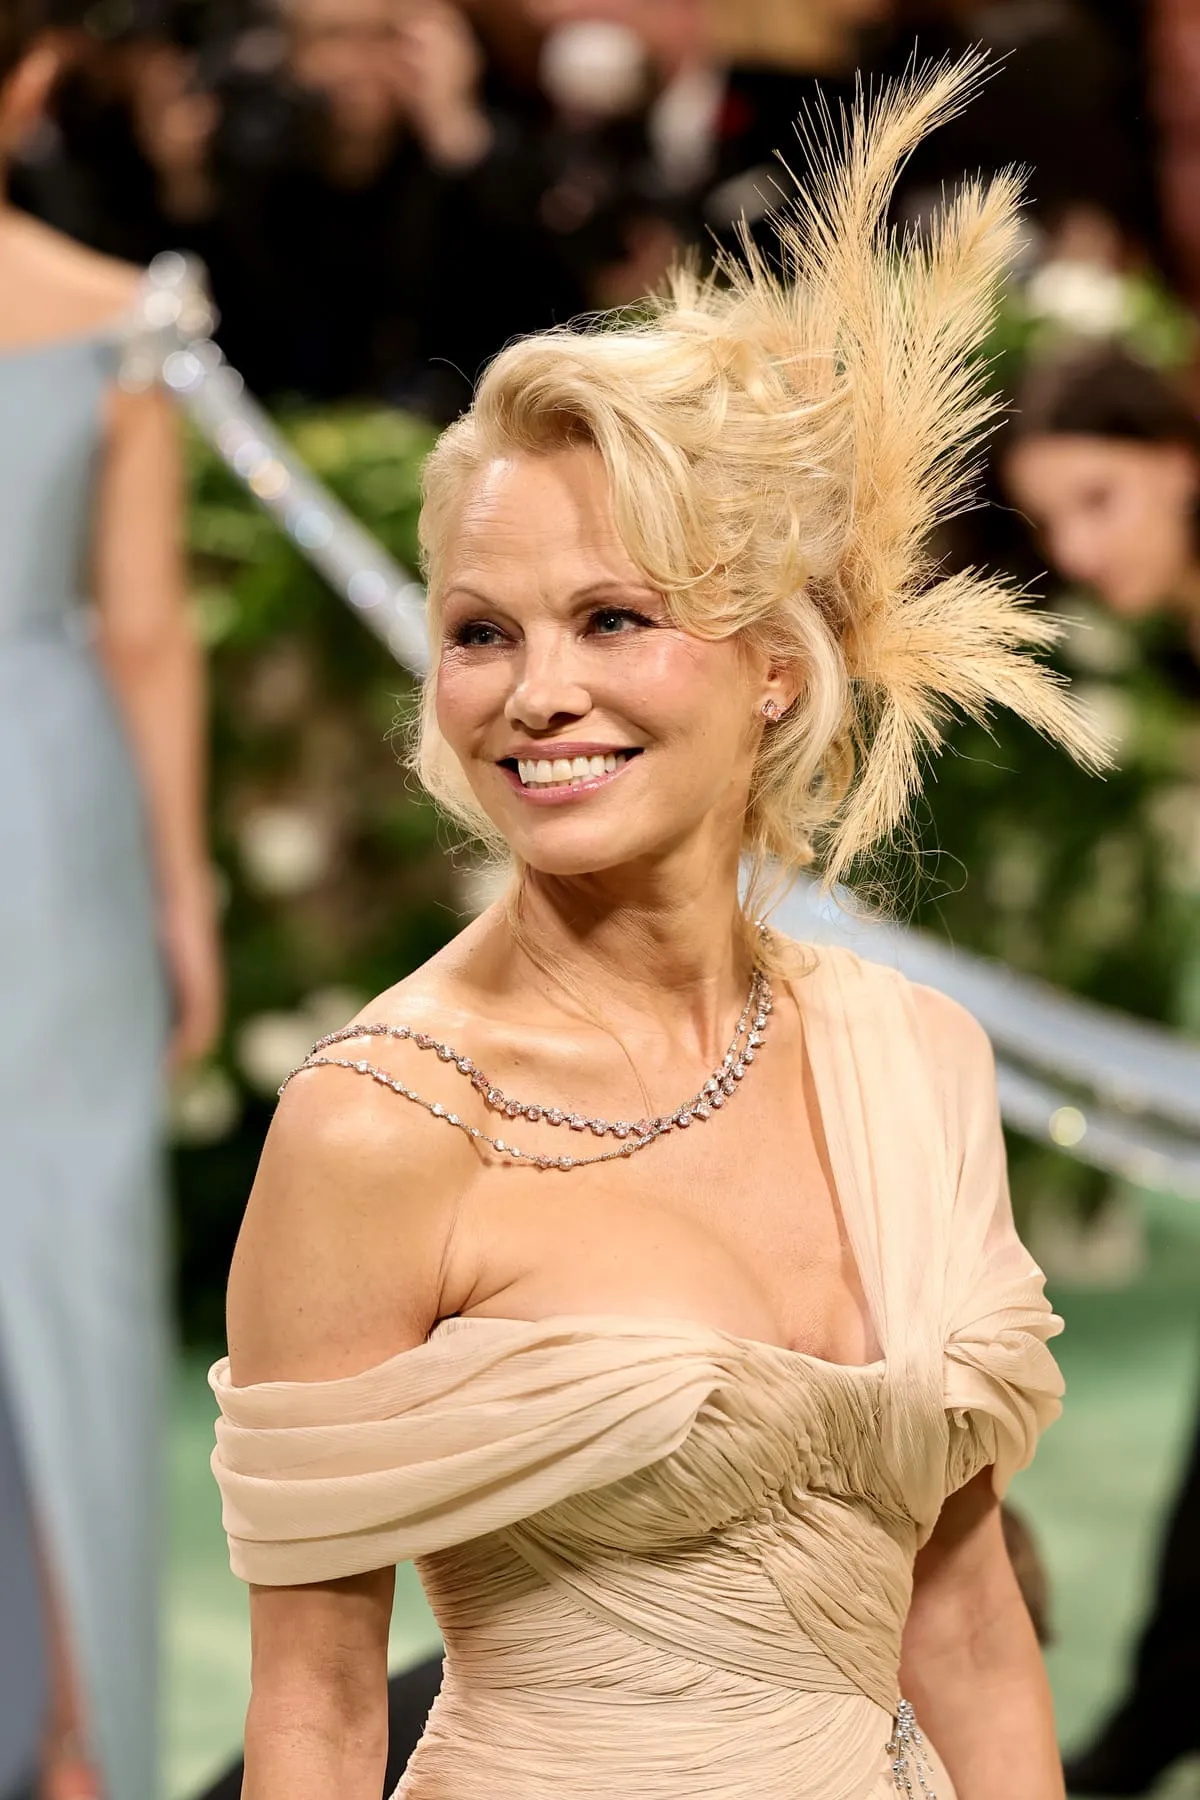 Pamela Anderson at The Met Gala wearing Custom Pandora Lab-Grown Diamonds_Getty Images_Getty Images Photo by Dia Dipasupil_